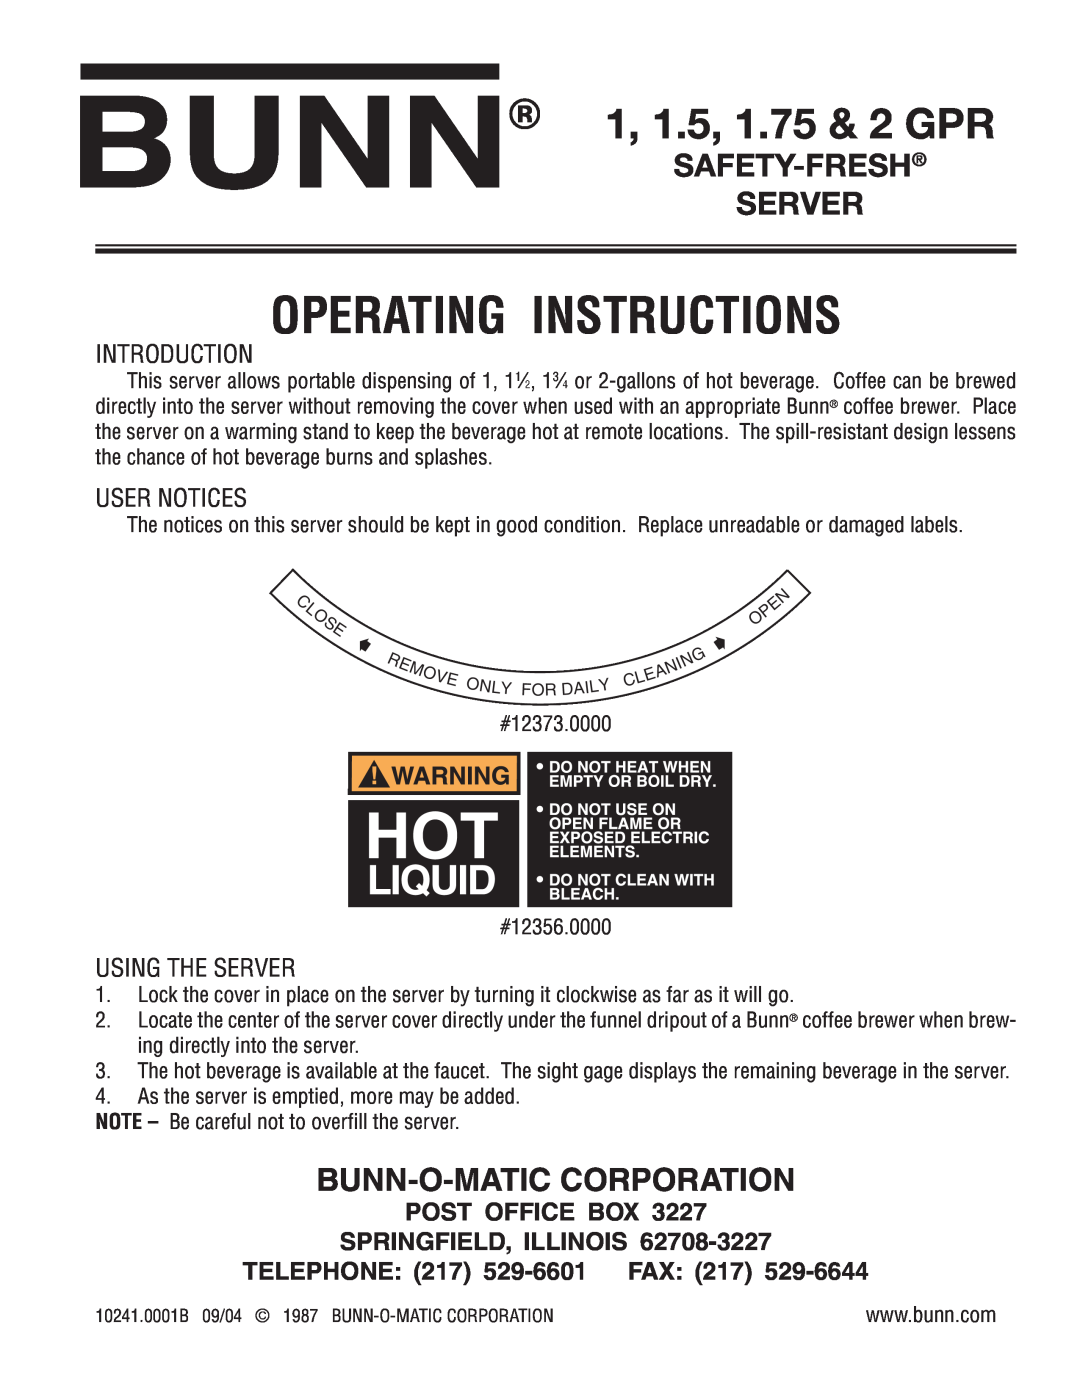 Bunn 1.5 operating instructions Introduction, User Notices, Using The Server, Post Office Box Springfield, Illinois, Fax 